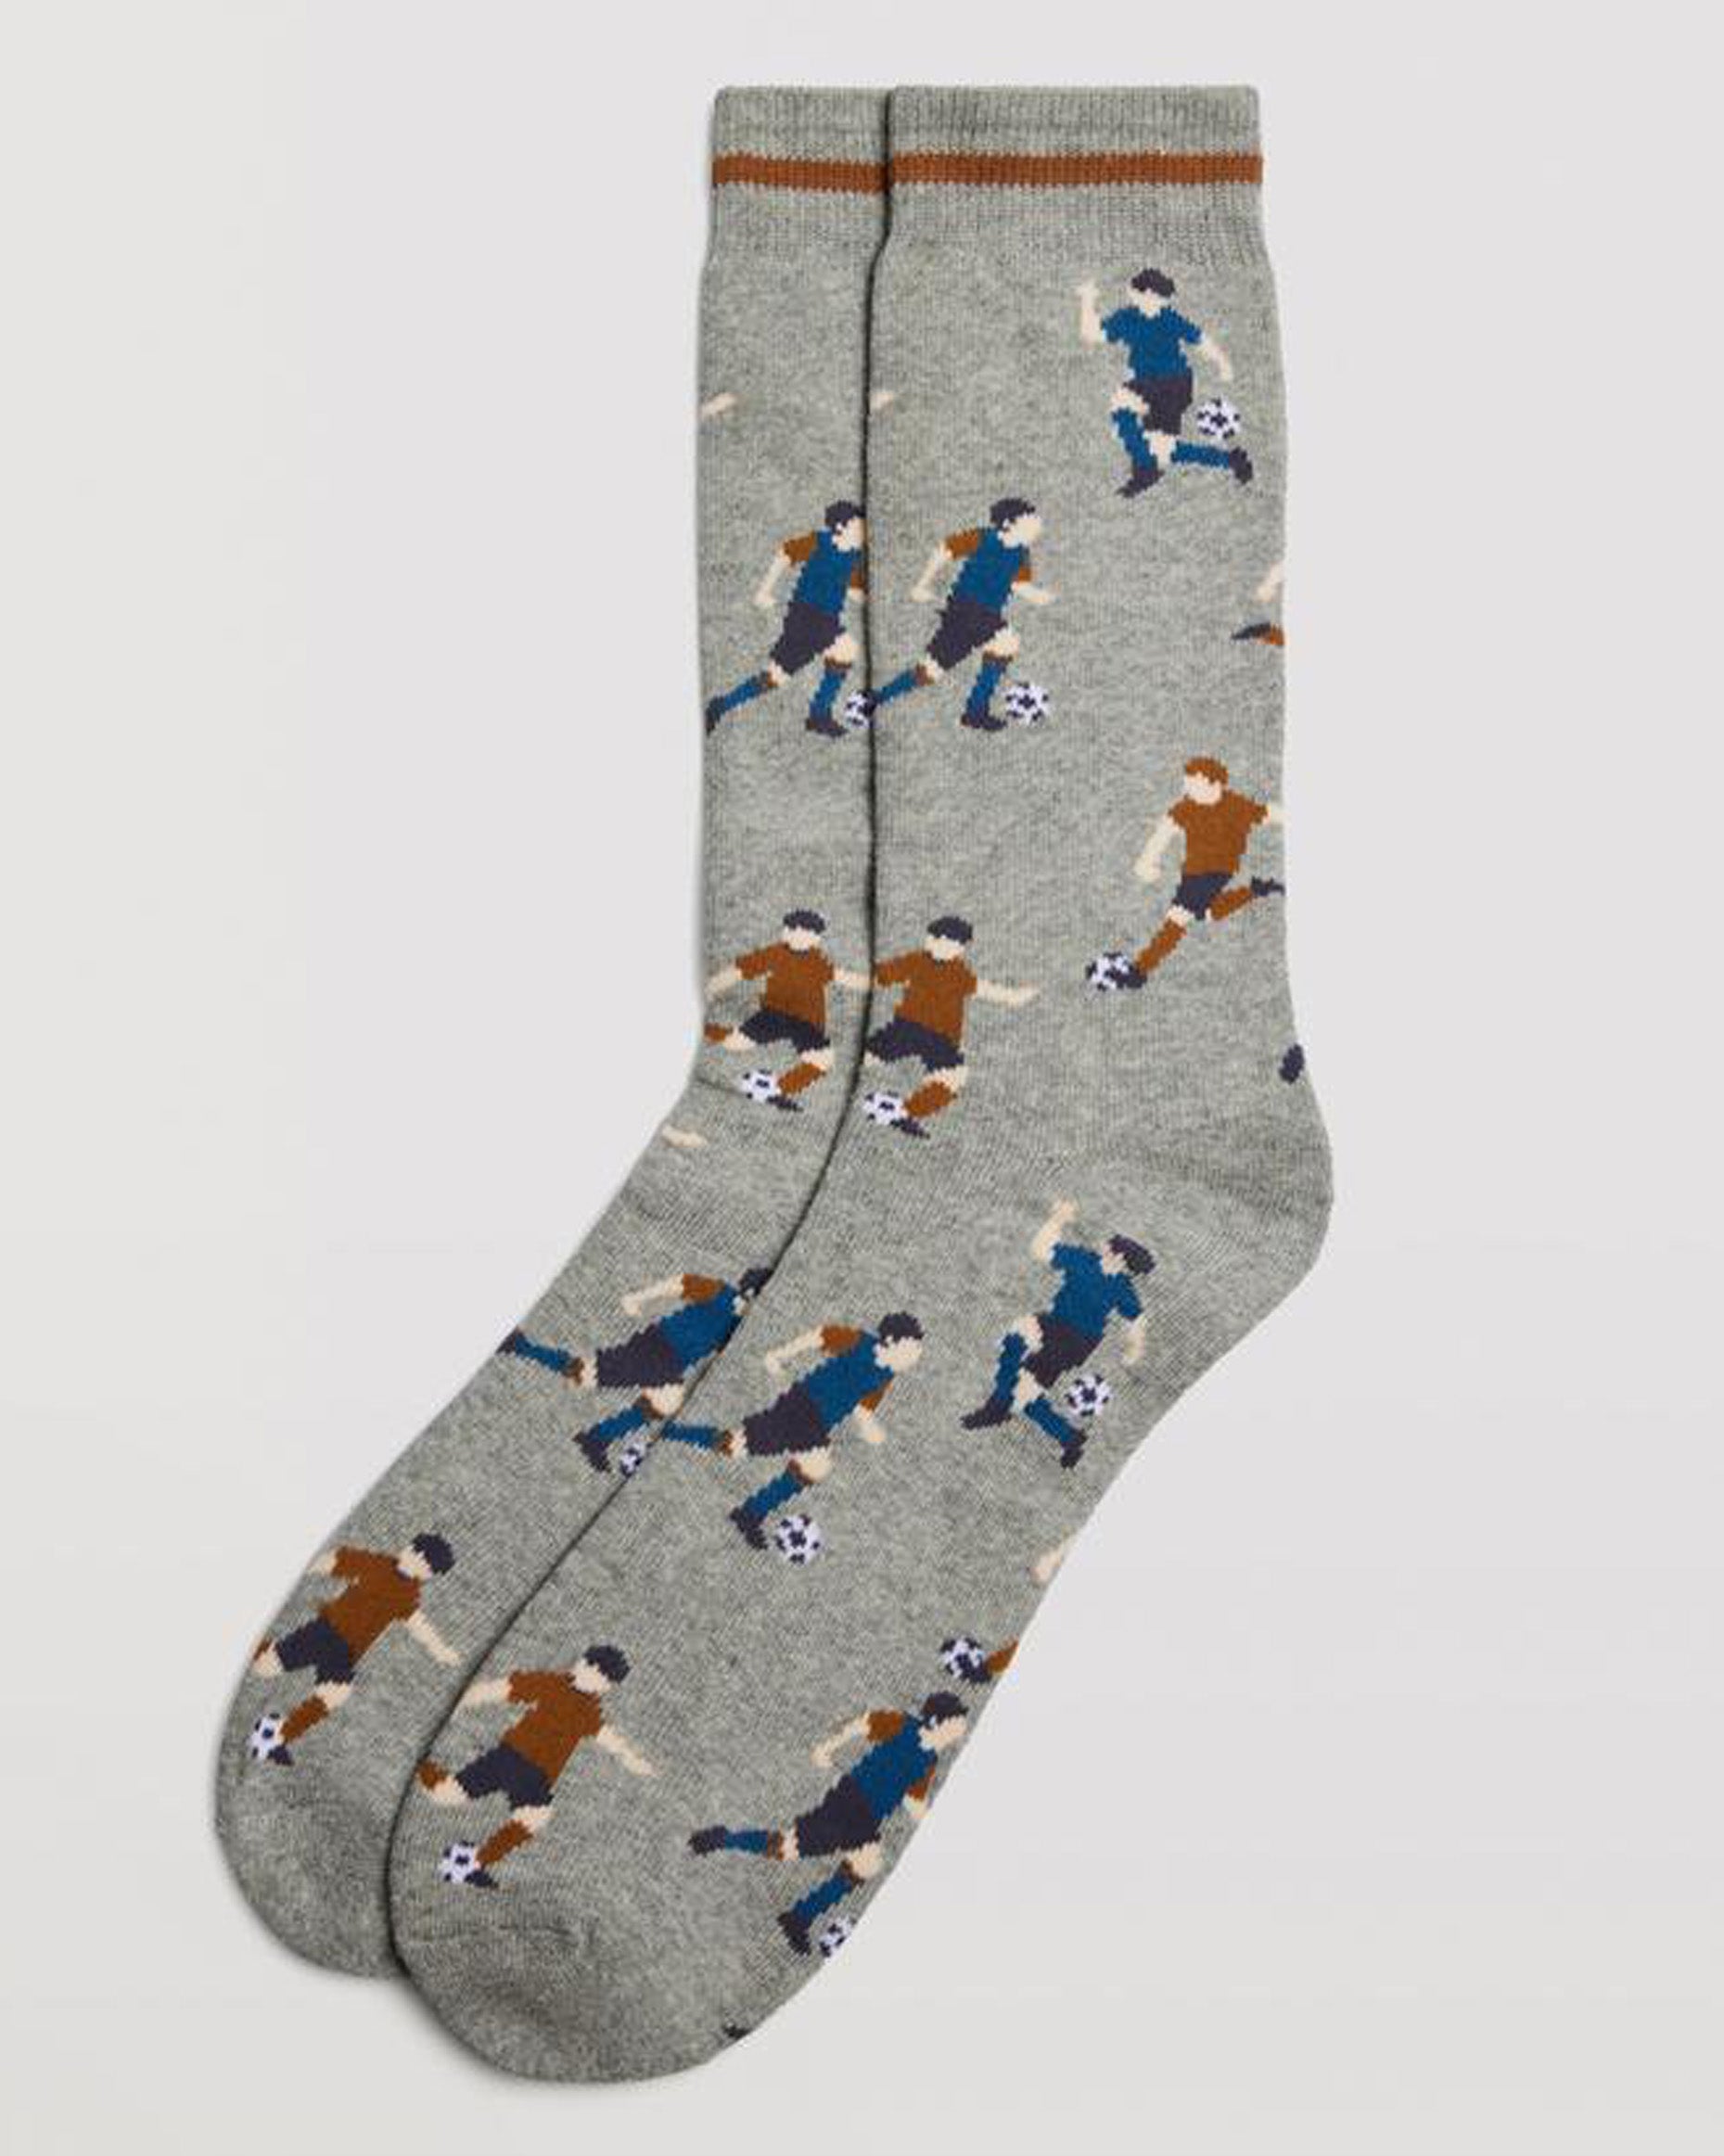 Ysabel Mora 22883 Football Socks - Light grey cotton socks with a warm thick terry lining, football players pattern in shades of blue and rust and a rust stripe on the cuff.